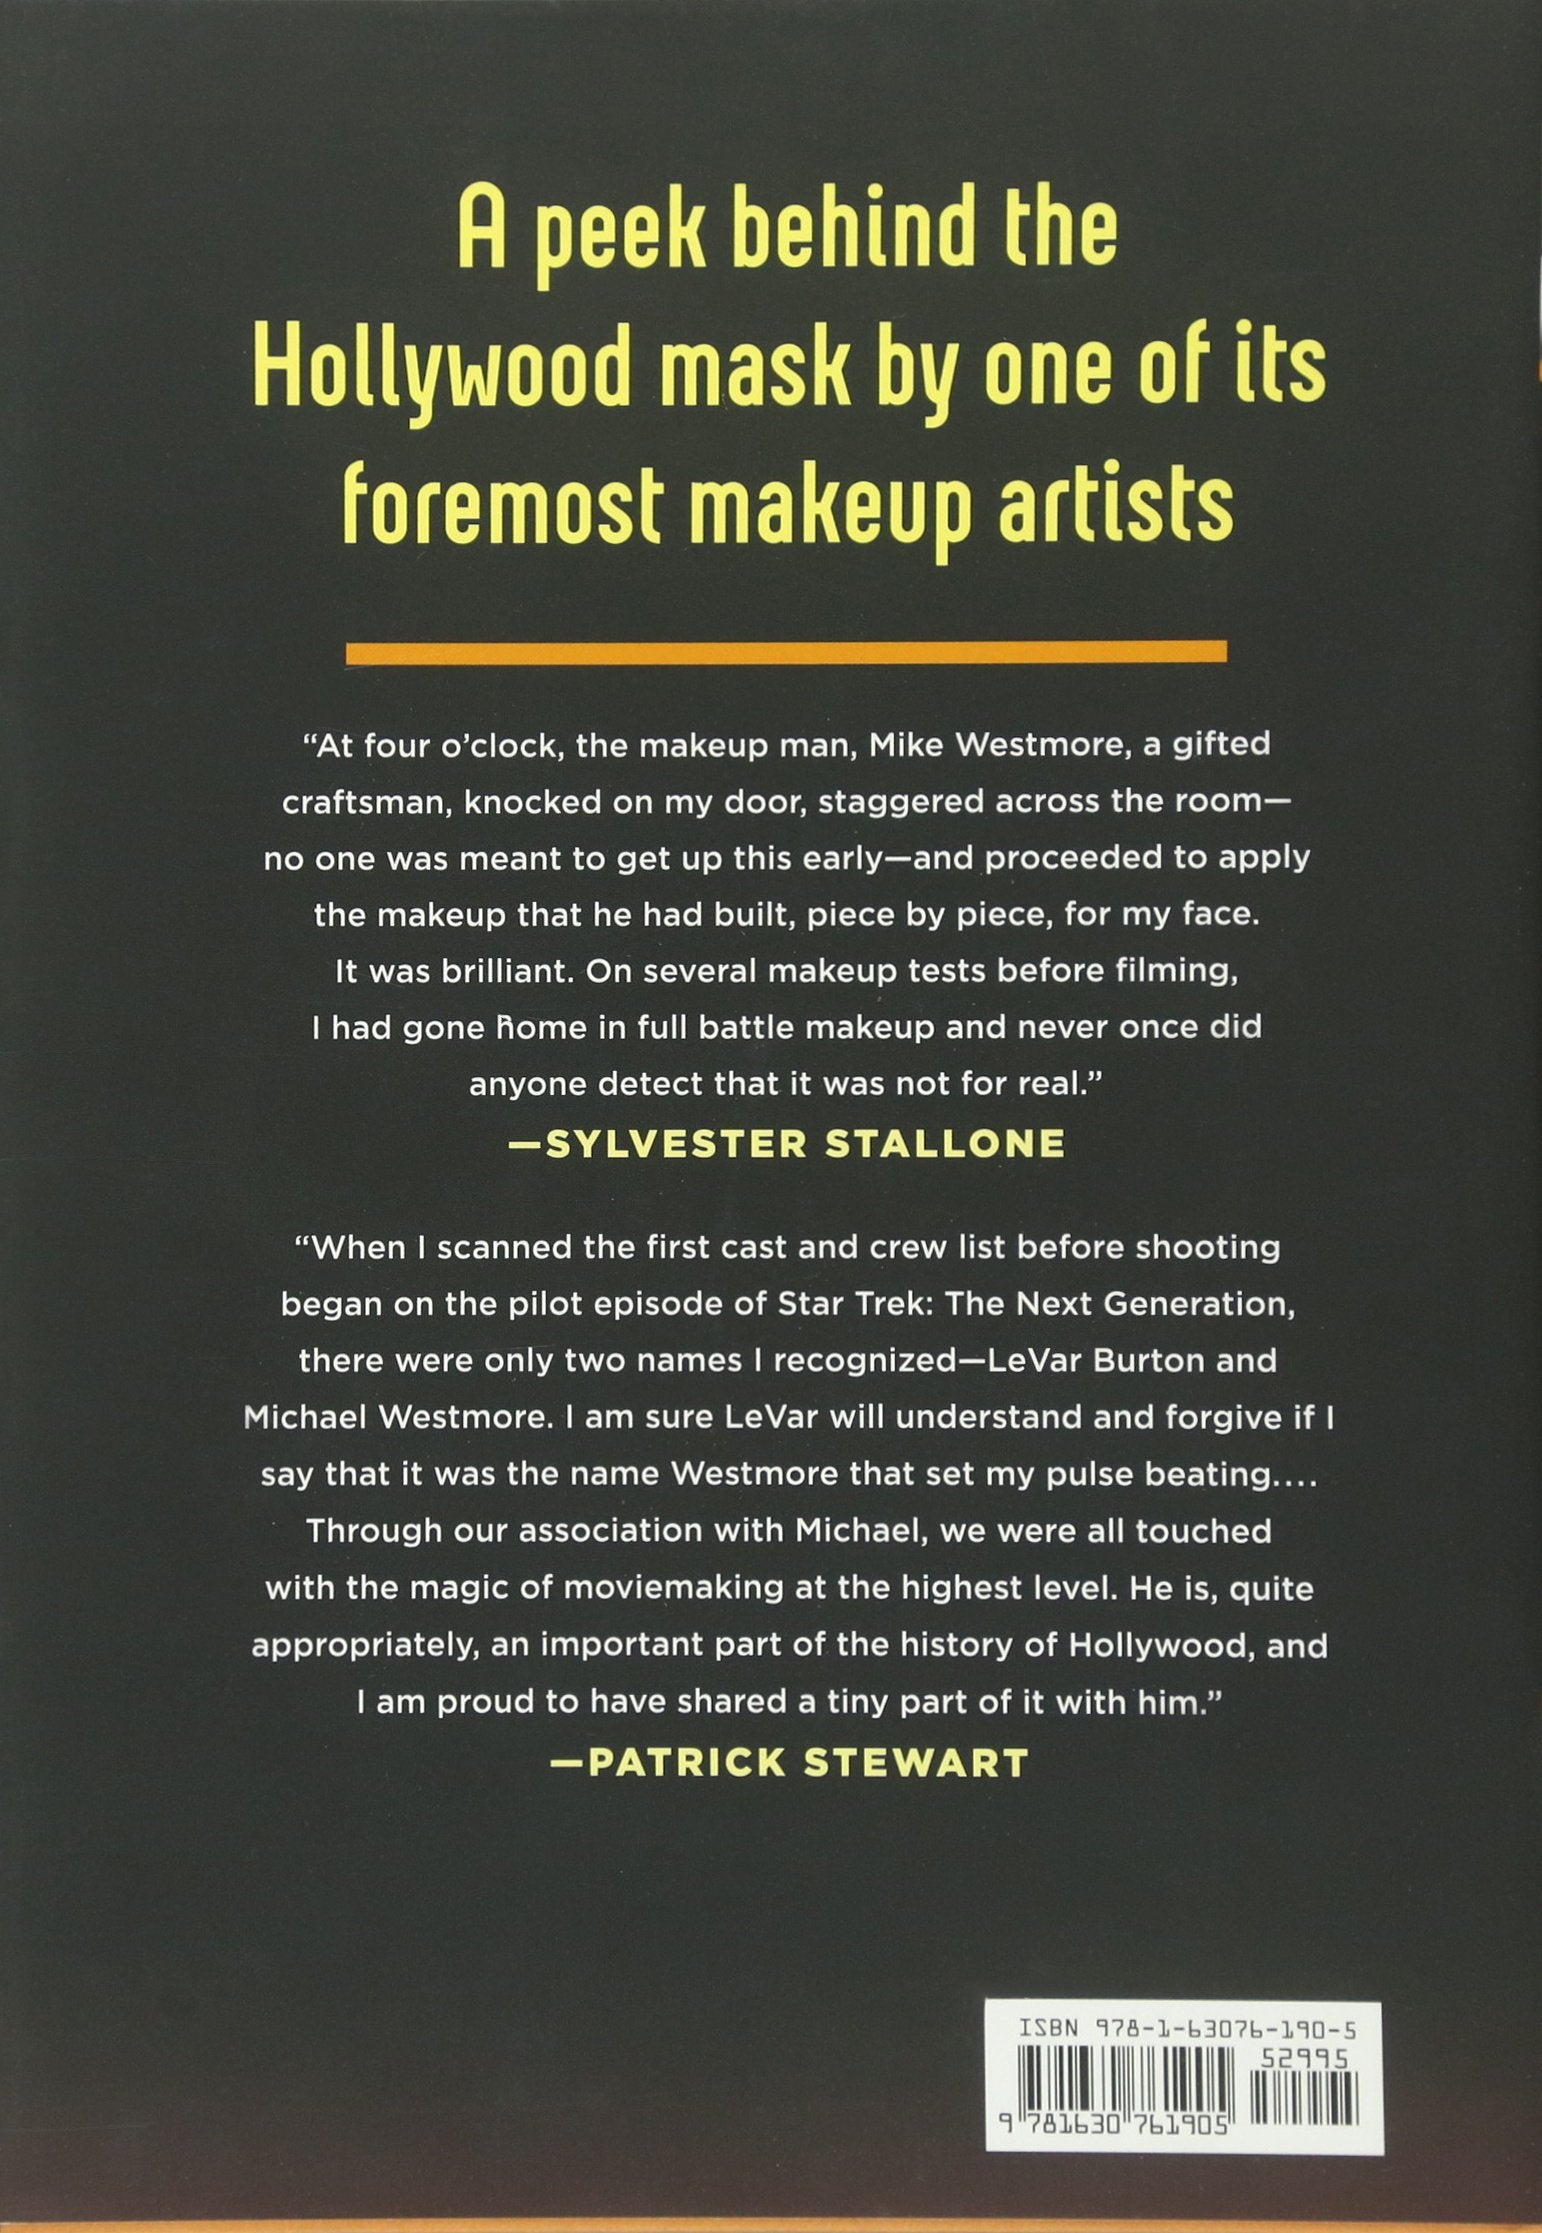 MAKEUP MAN: CREATIONS OF HOLLYWOOD'S MICHAEL WESTMORE